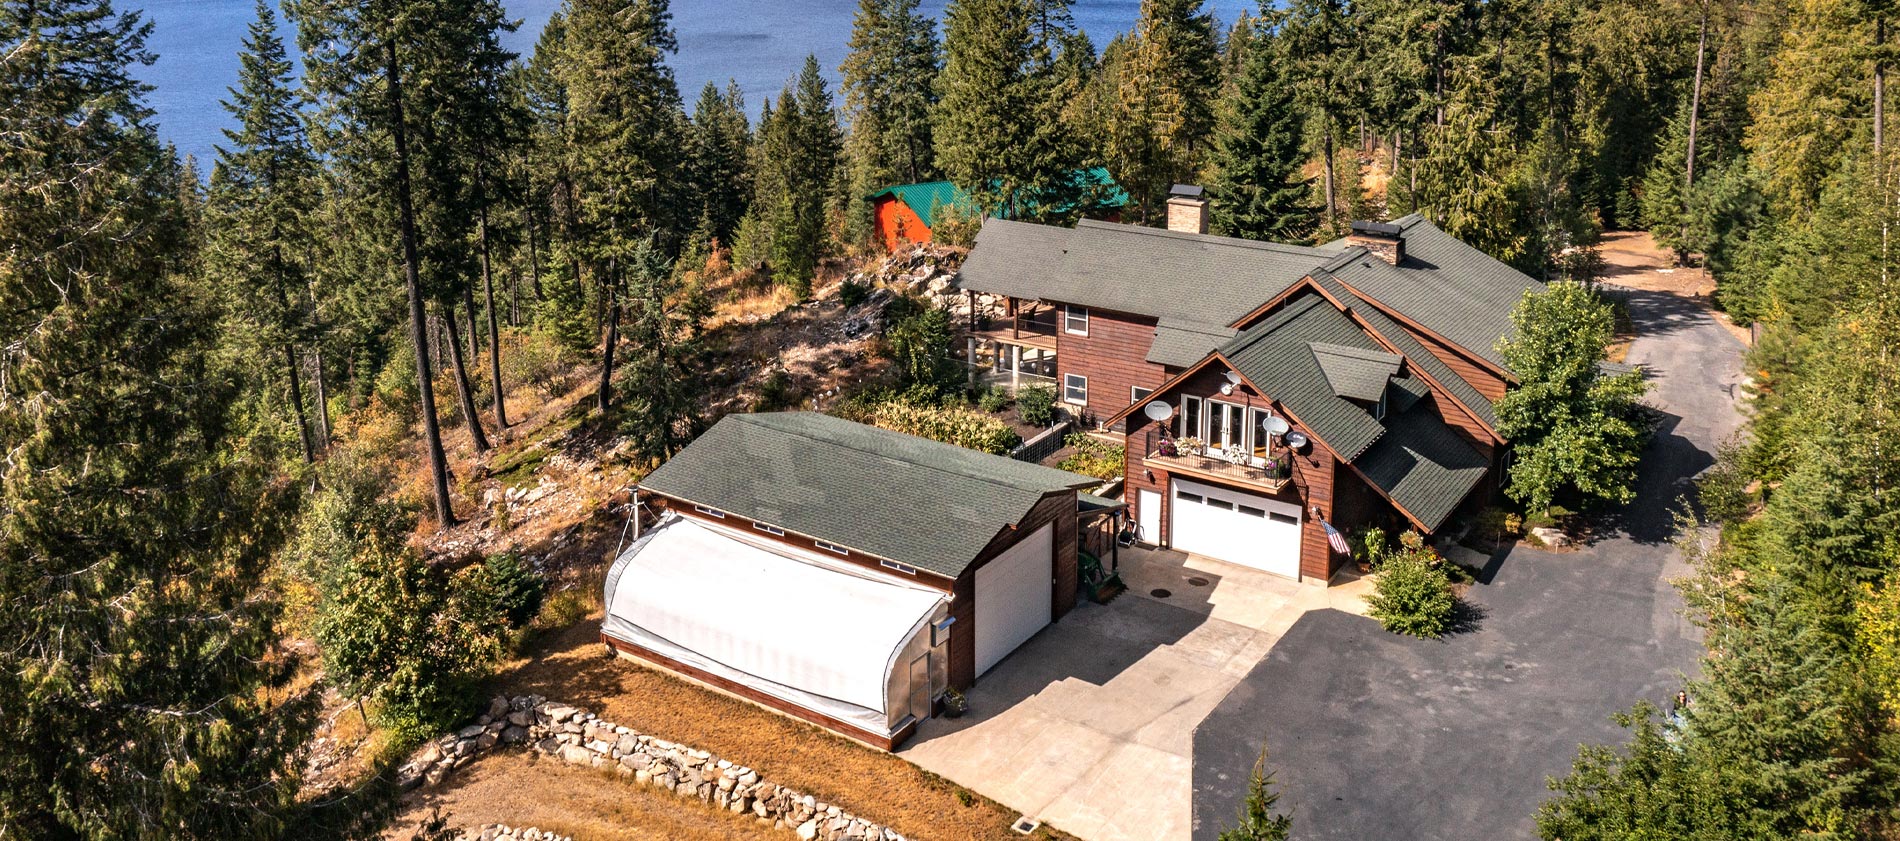 One-of-a-kind custom home on 13 acres (2 separate lots) overlooking the pristine waters of Priest Lake